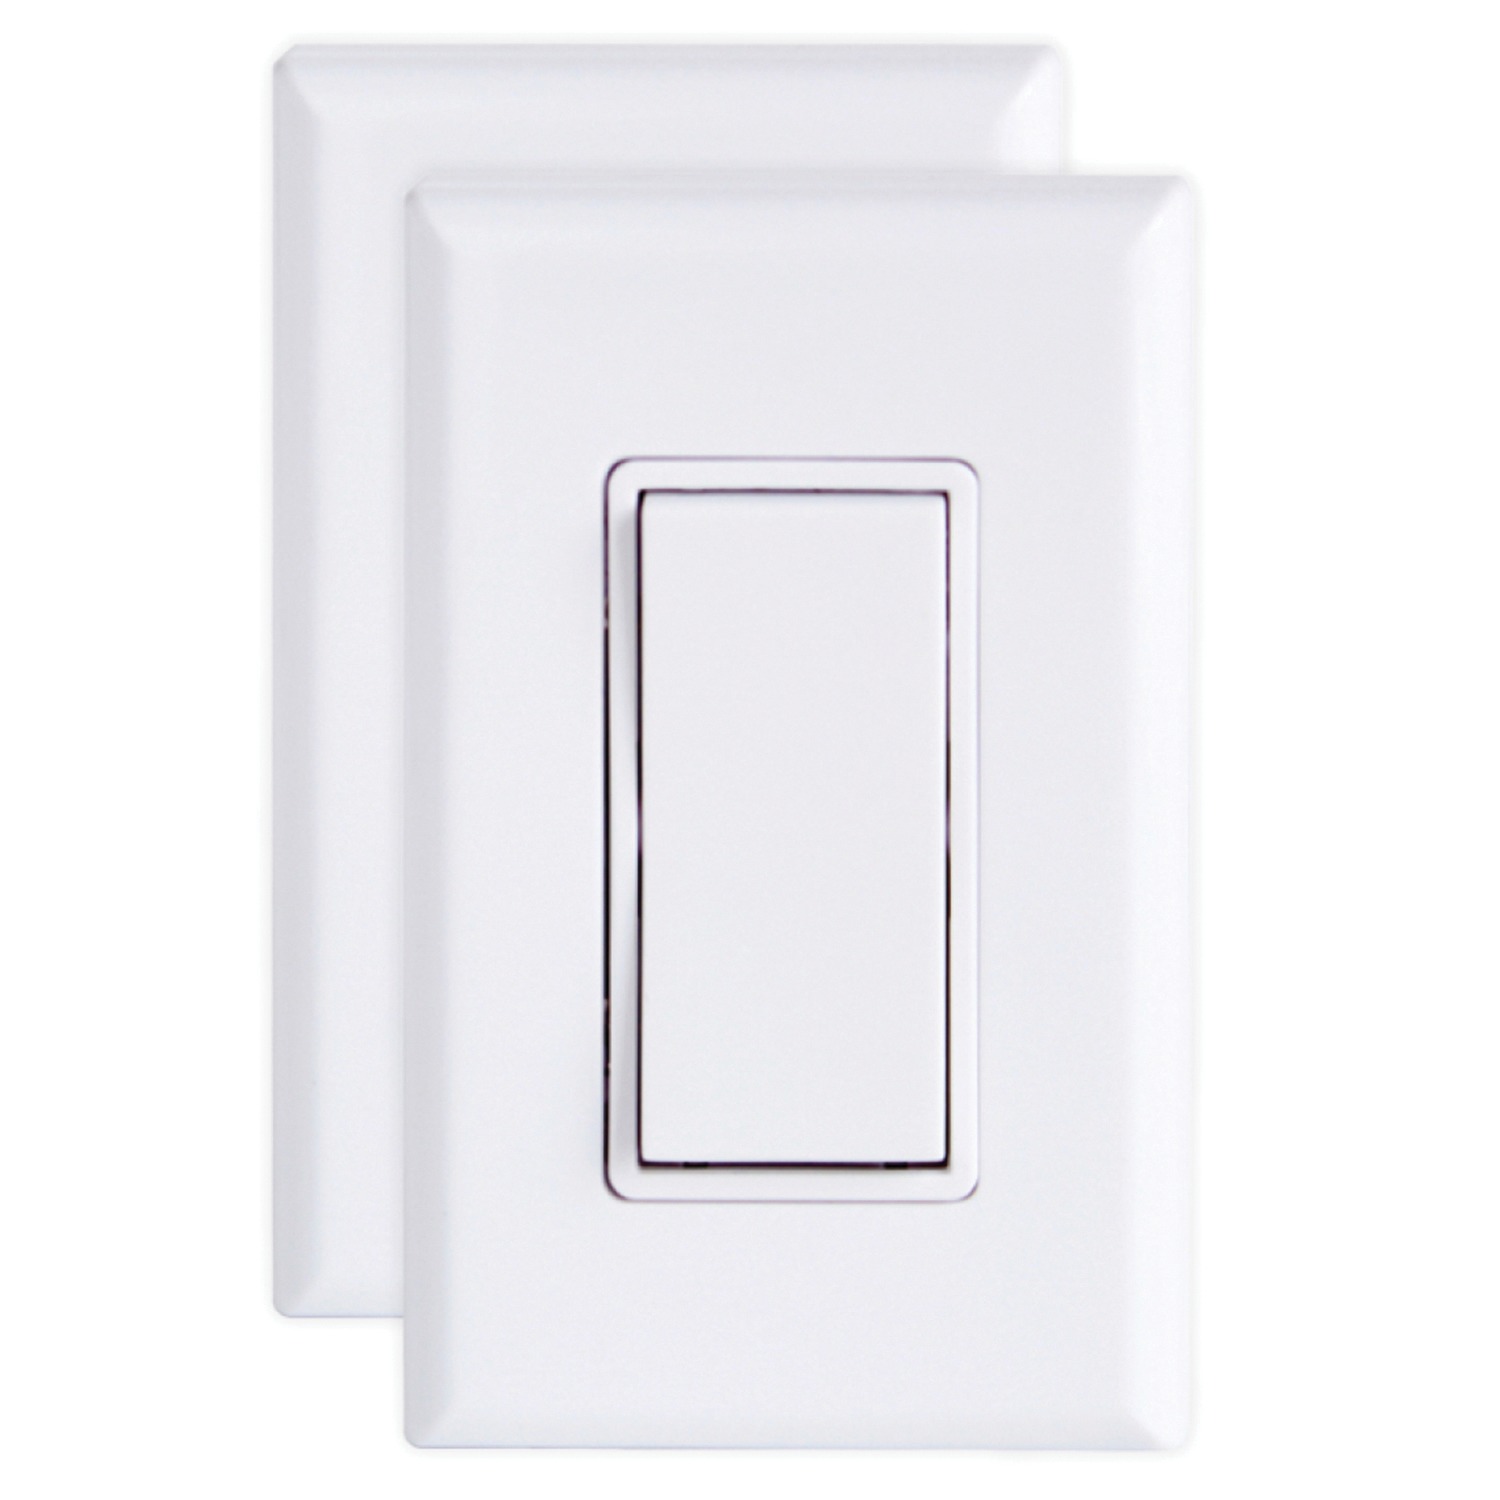 RUNLESSWIRE RW9-S2KWH 3-way Wireless Light Switch Kit with Controller and  Light Switches (White)